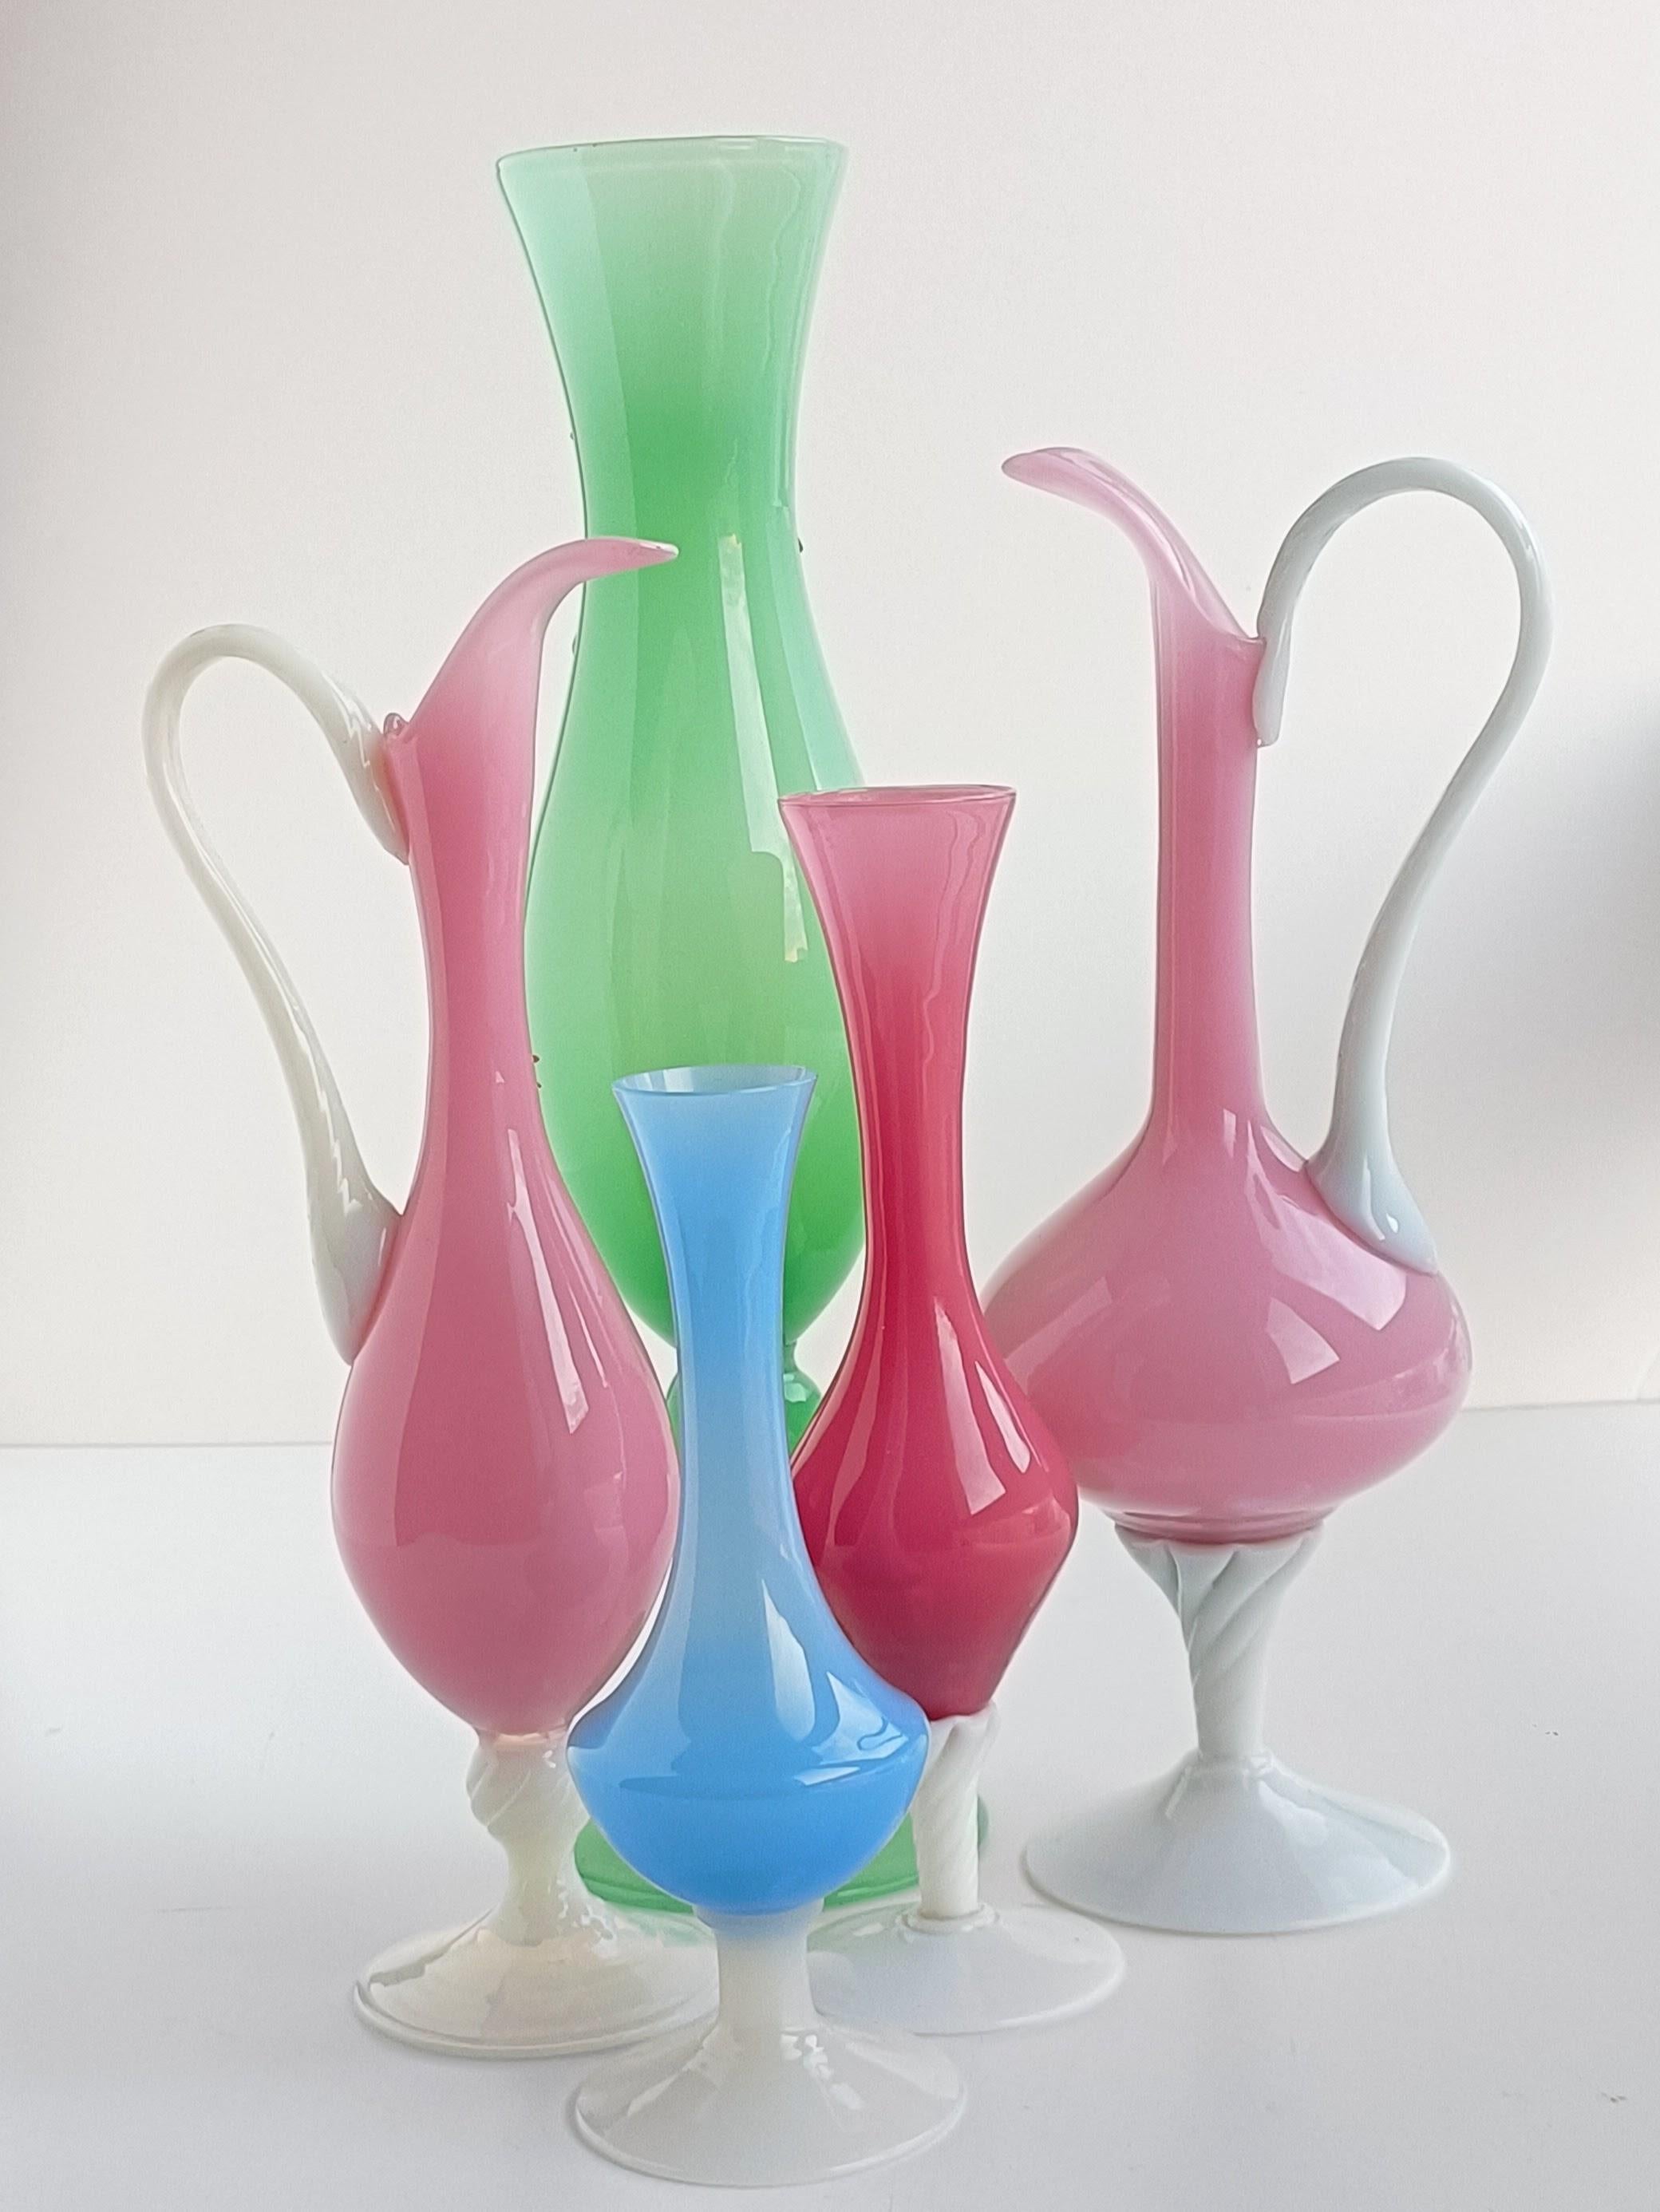 Hand-Crafted Empoli Glass Opaline Florence Set of Vases, Italy, 1950s.  For Sale